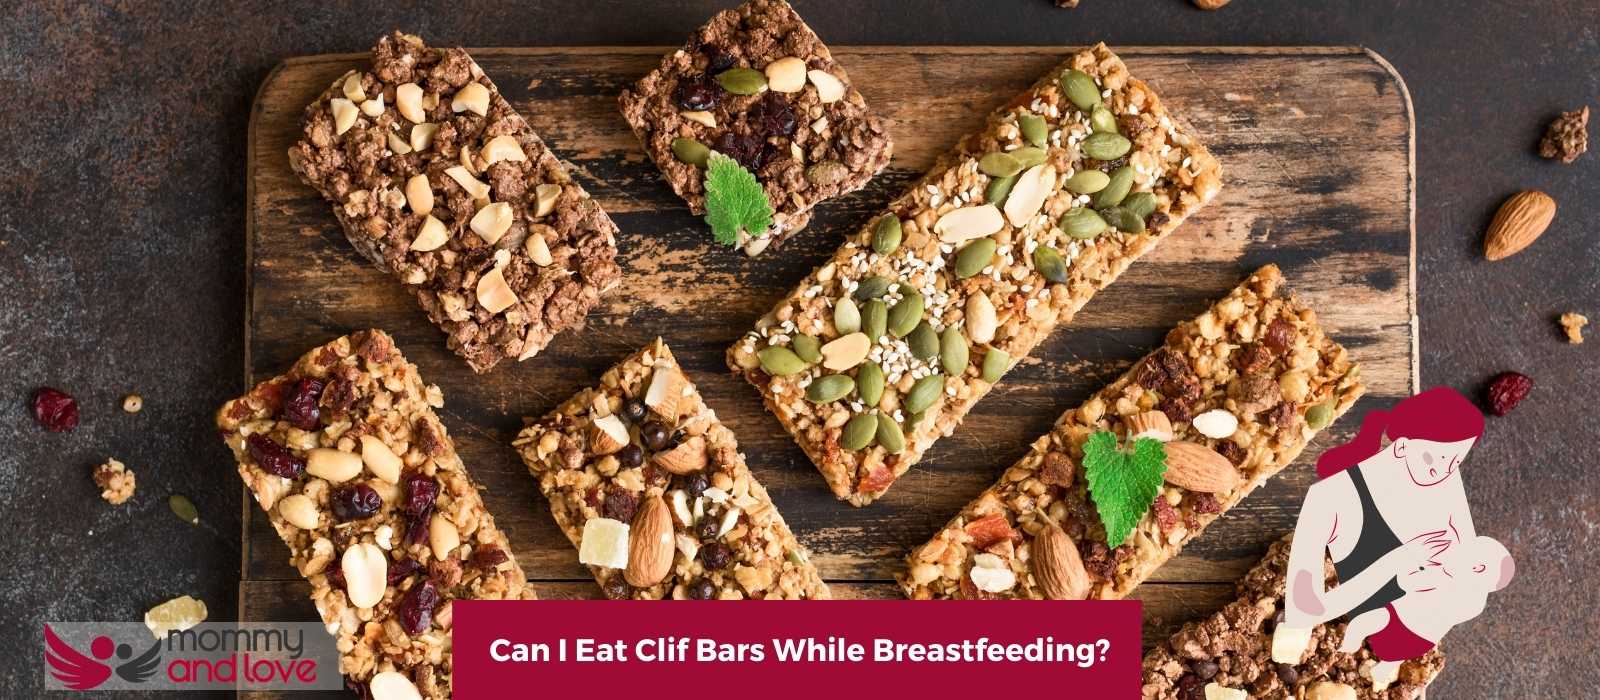 Can I Eat Clif Bars While Breastfeeding